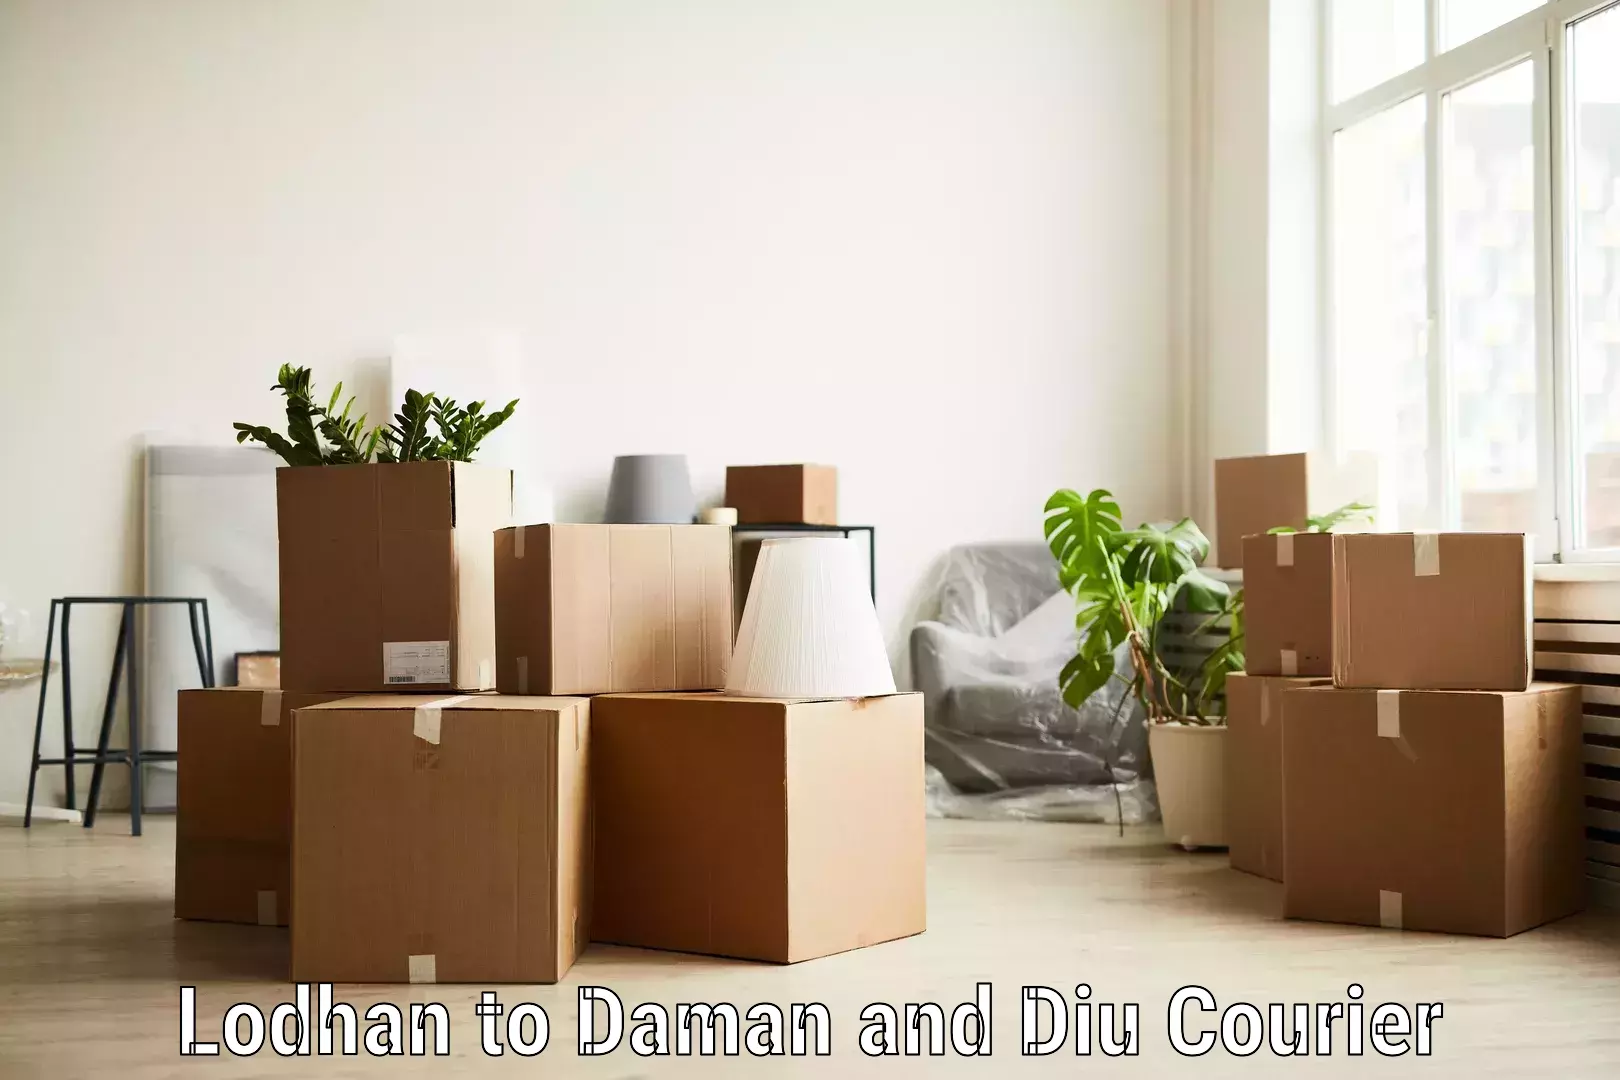 Optimized shipping routes Lodhan to Daman and Diu